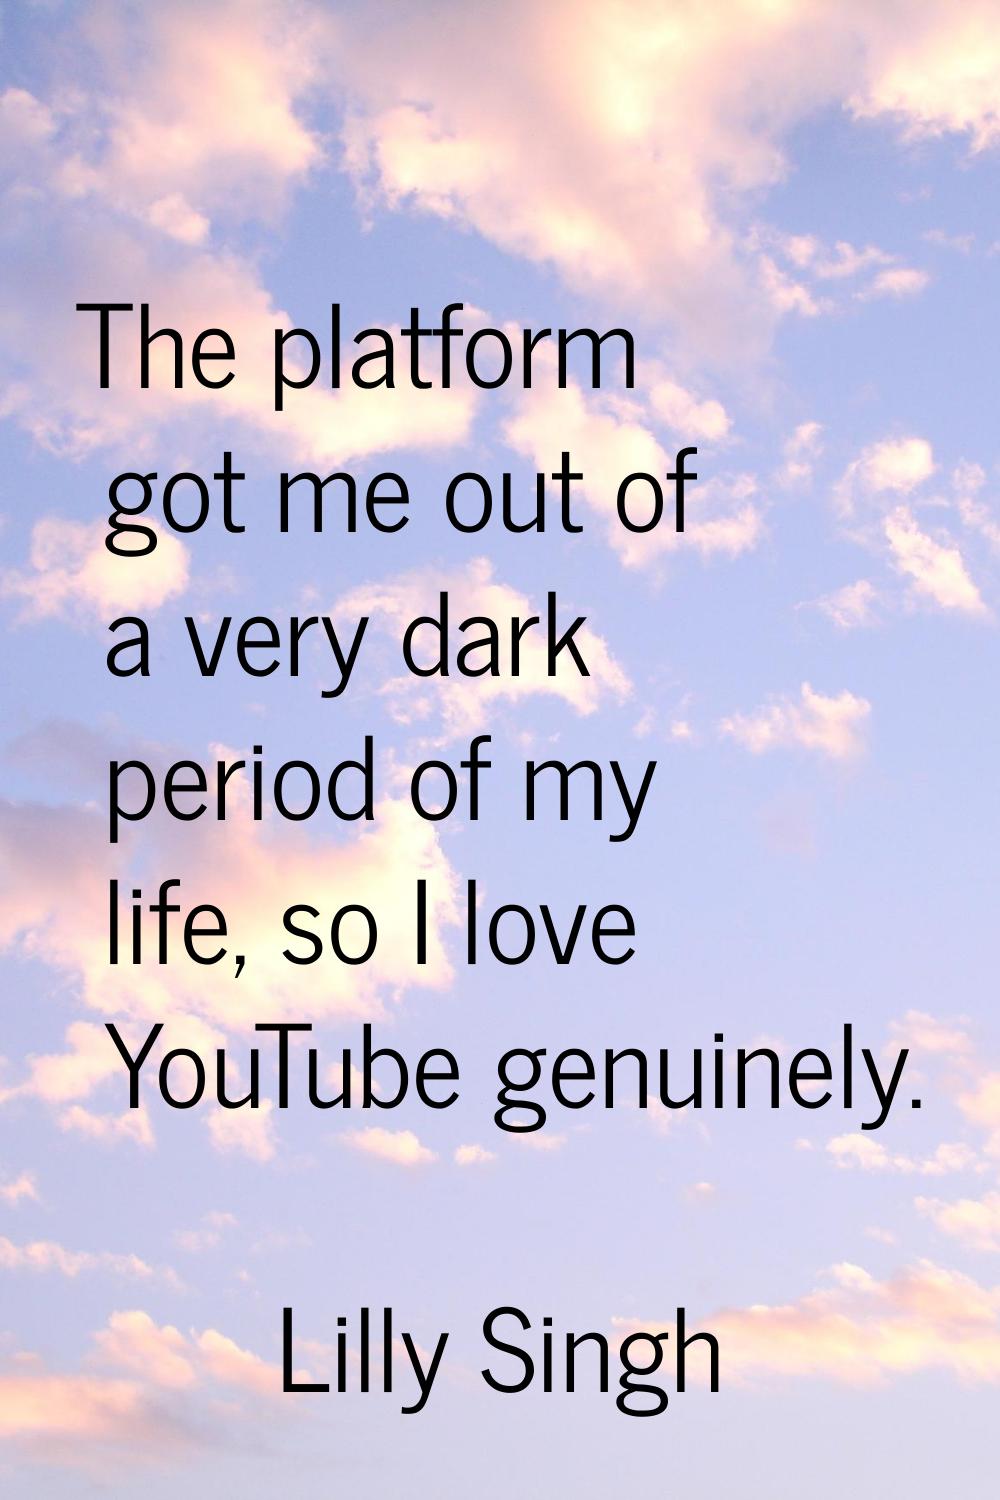 The platform got me out of a very dark period of my life, so I love YouTube genuinely.